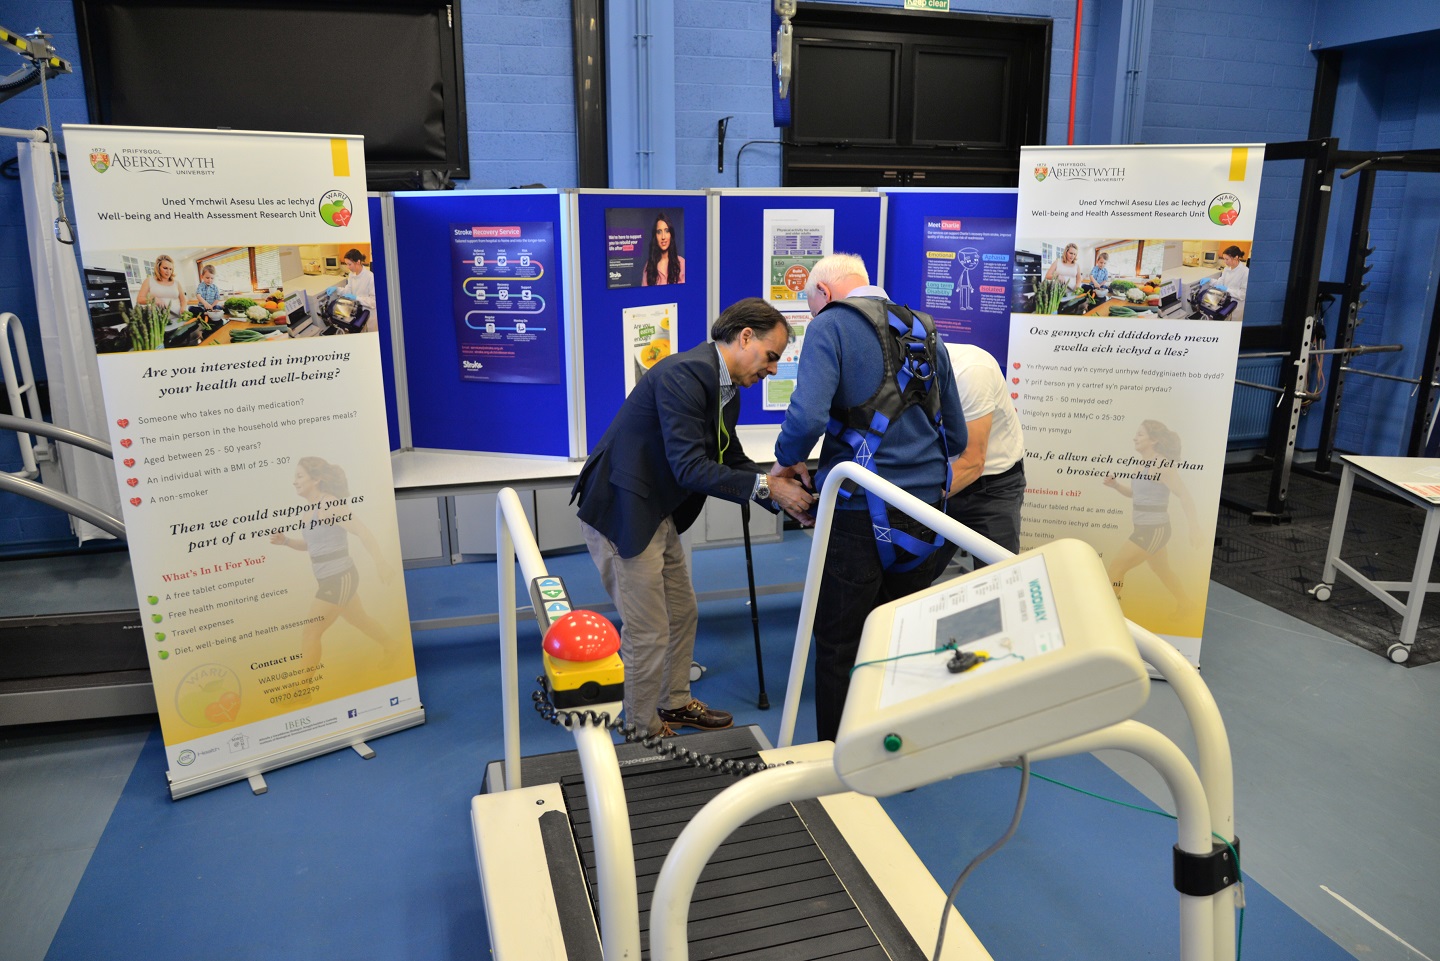 The new app will help stroke patients recover at home during Covid-19 when they are unable to visit exercise facilities such as Aberystwyth University’s Sport & Exercise Department.